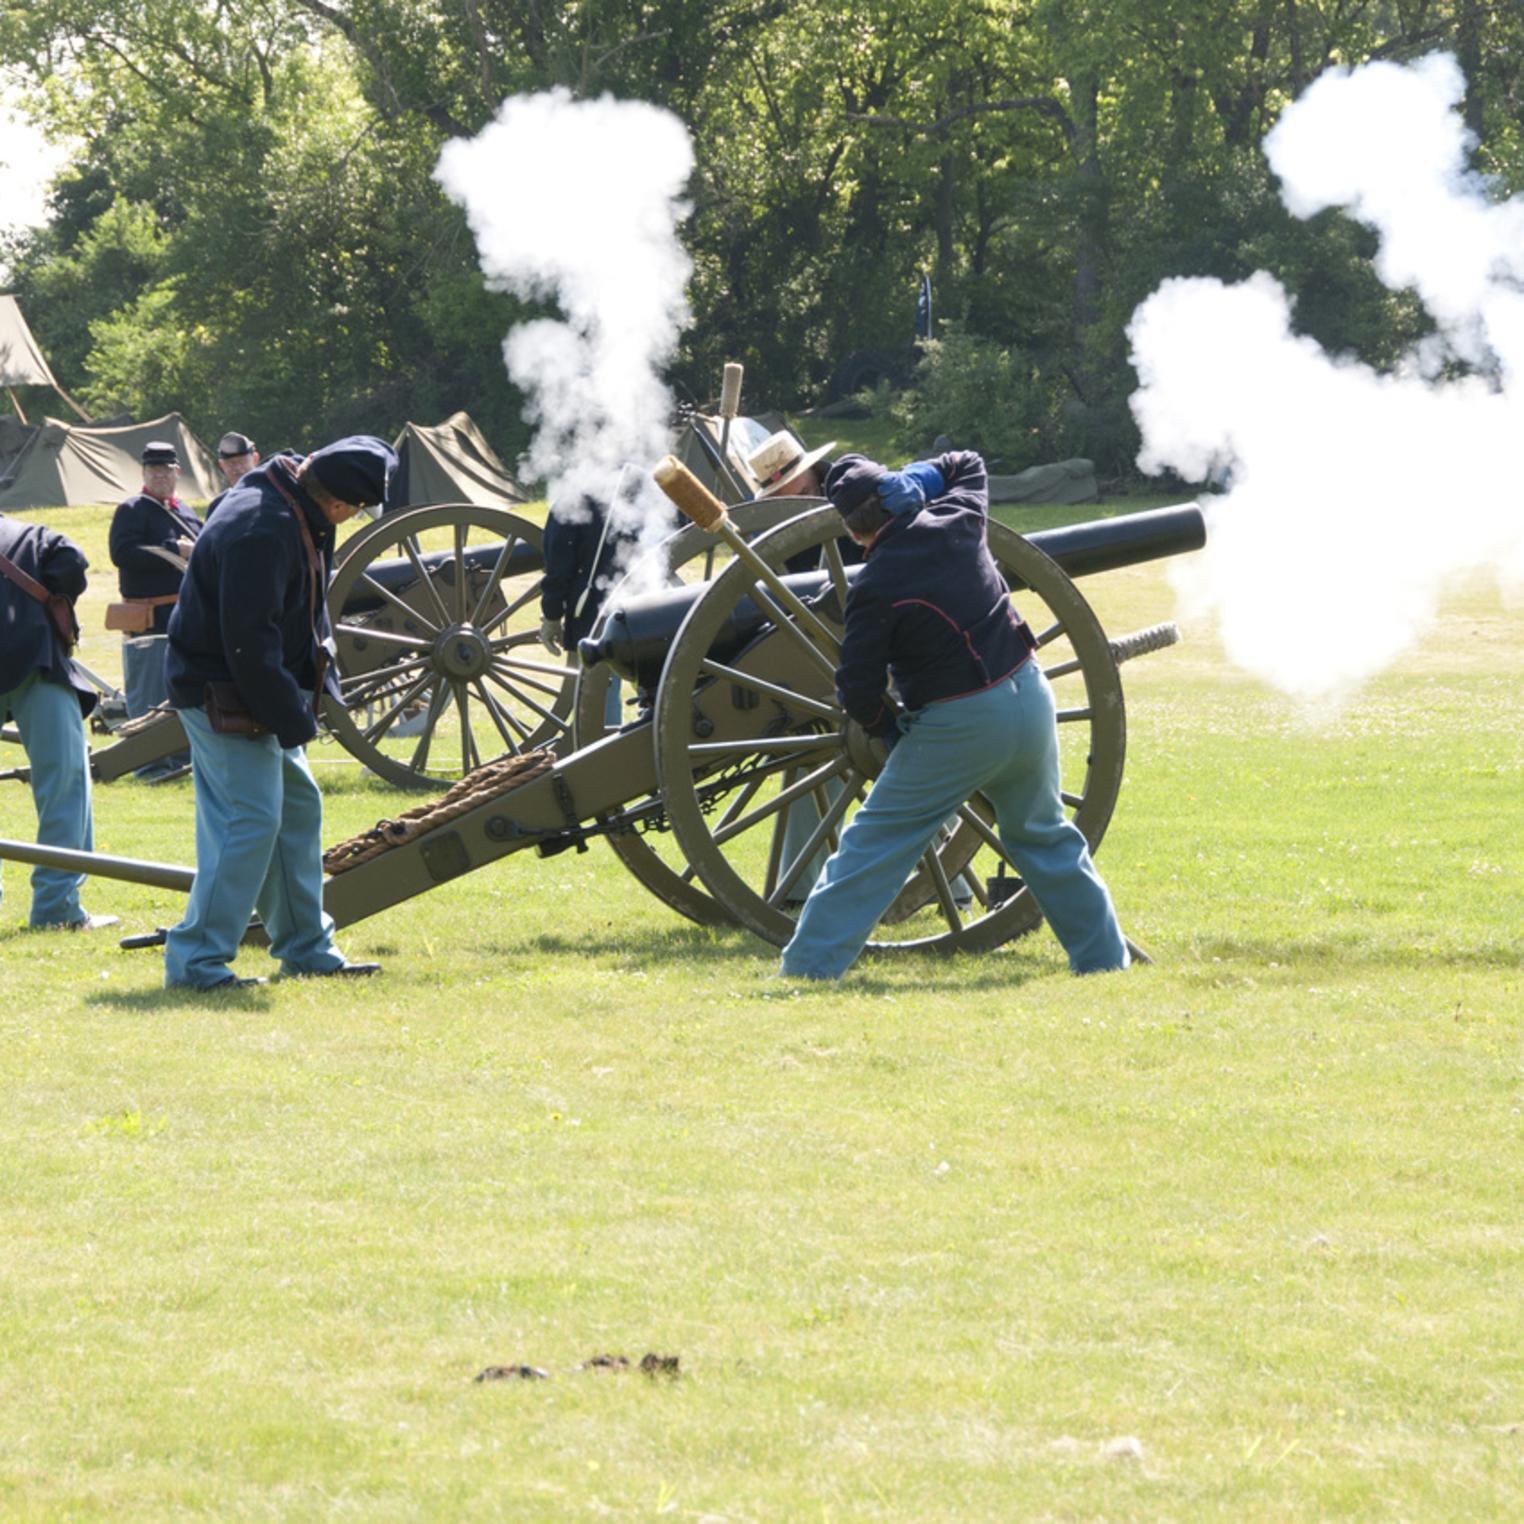 Artillery Demonstration at Army Heritage Days